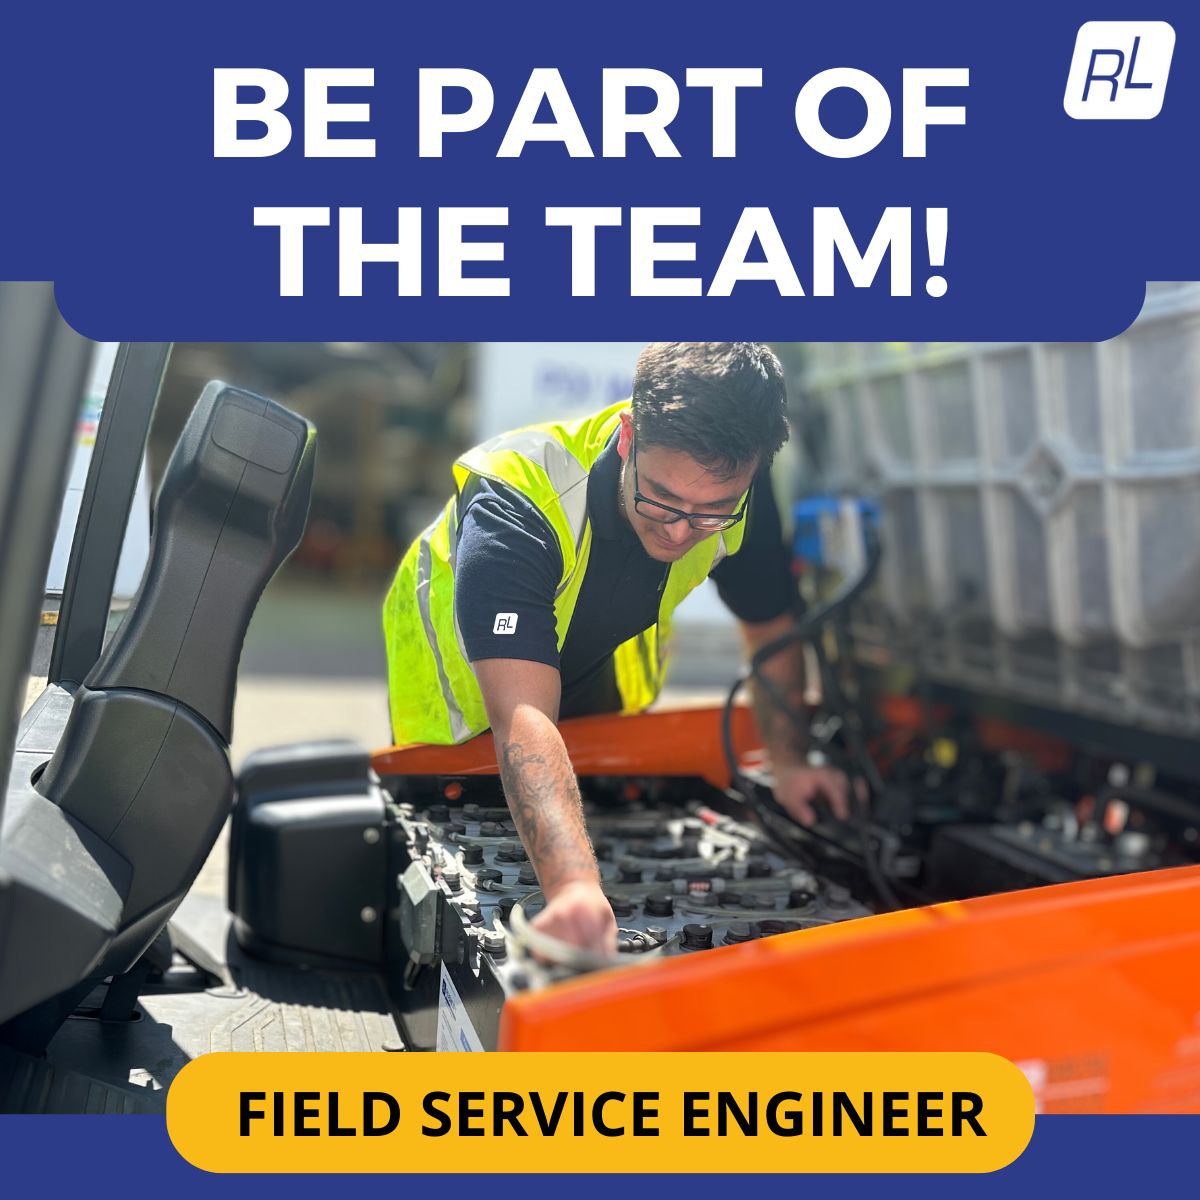 Join our national team of Field Service Engineers!​​​
​​​
Benefit from a competitive salary, great support, our employee welfare scheme & much more. ​​​
​​​​​
Find out more 👉ow.ly/Tpb250Q8E43​​
​​​
#Careers #Vacancy #Hiring #JoinTheTeam #Engineer #FieldServiceEngineer #MHE